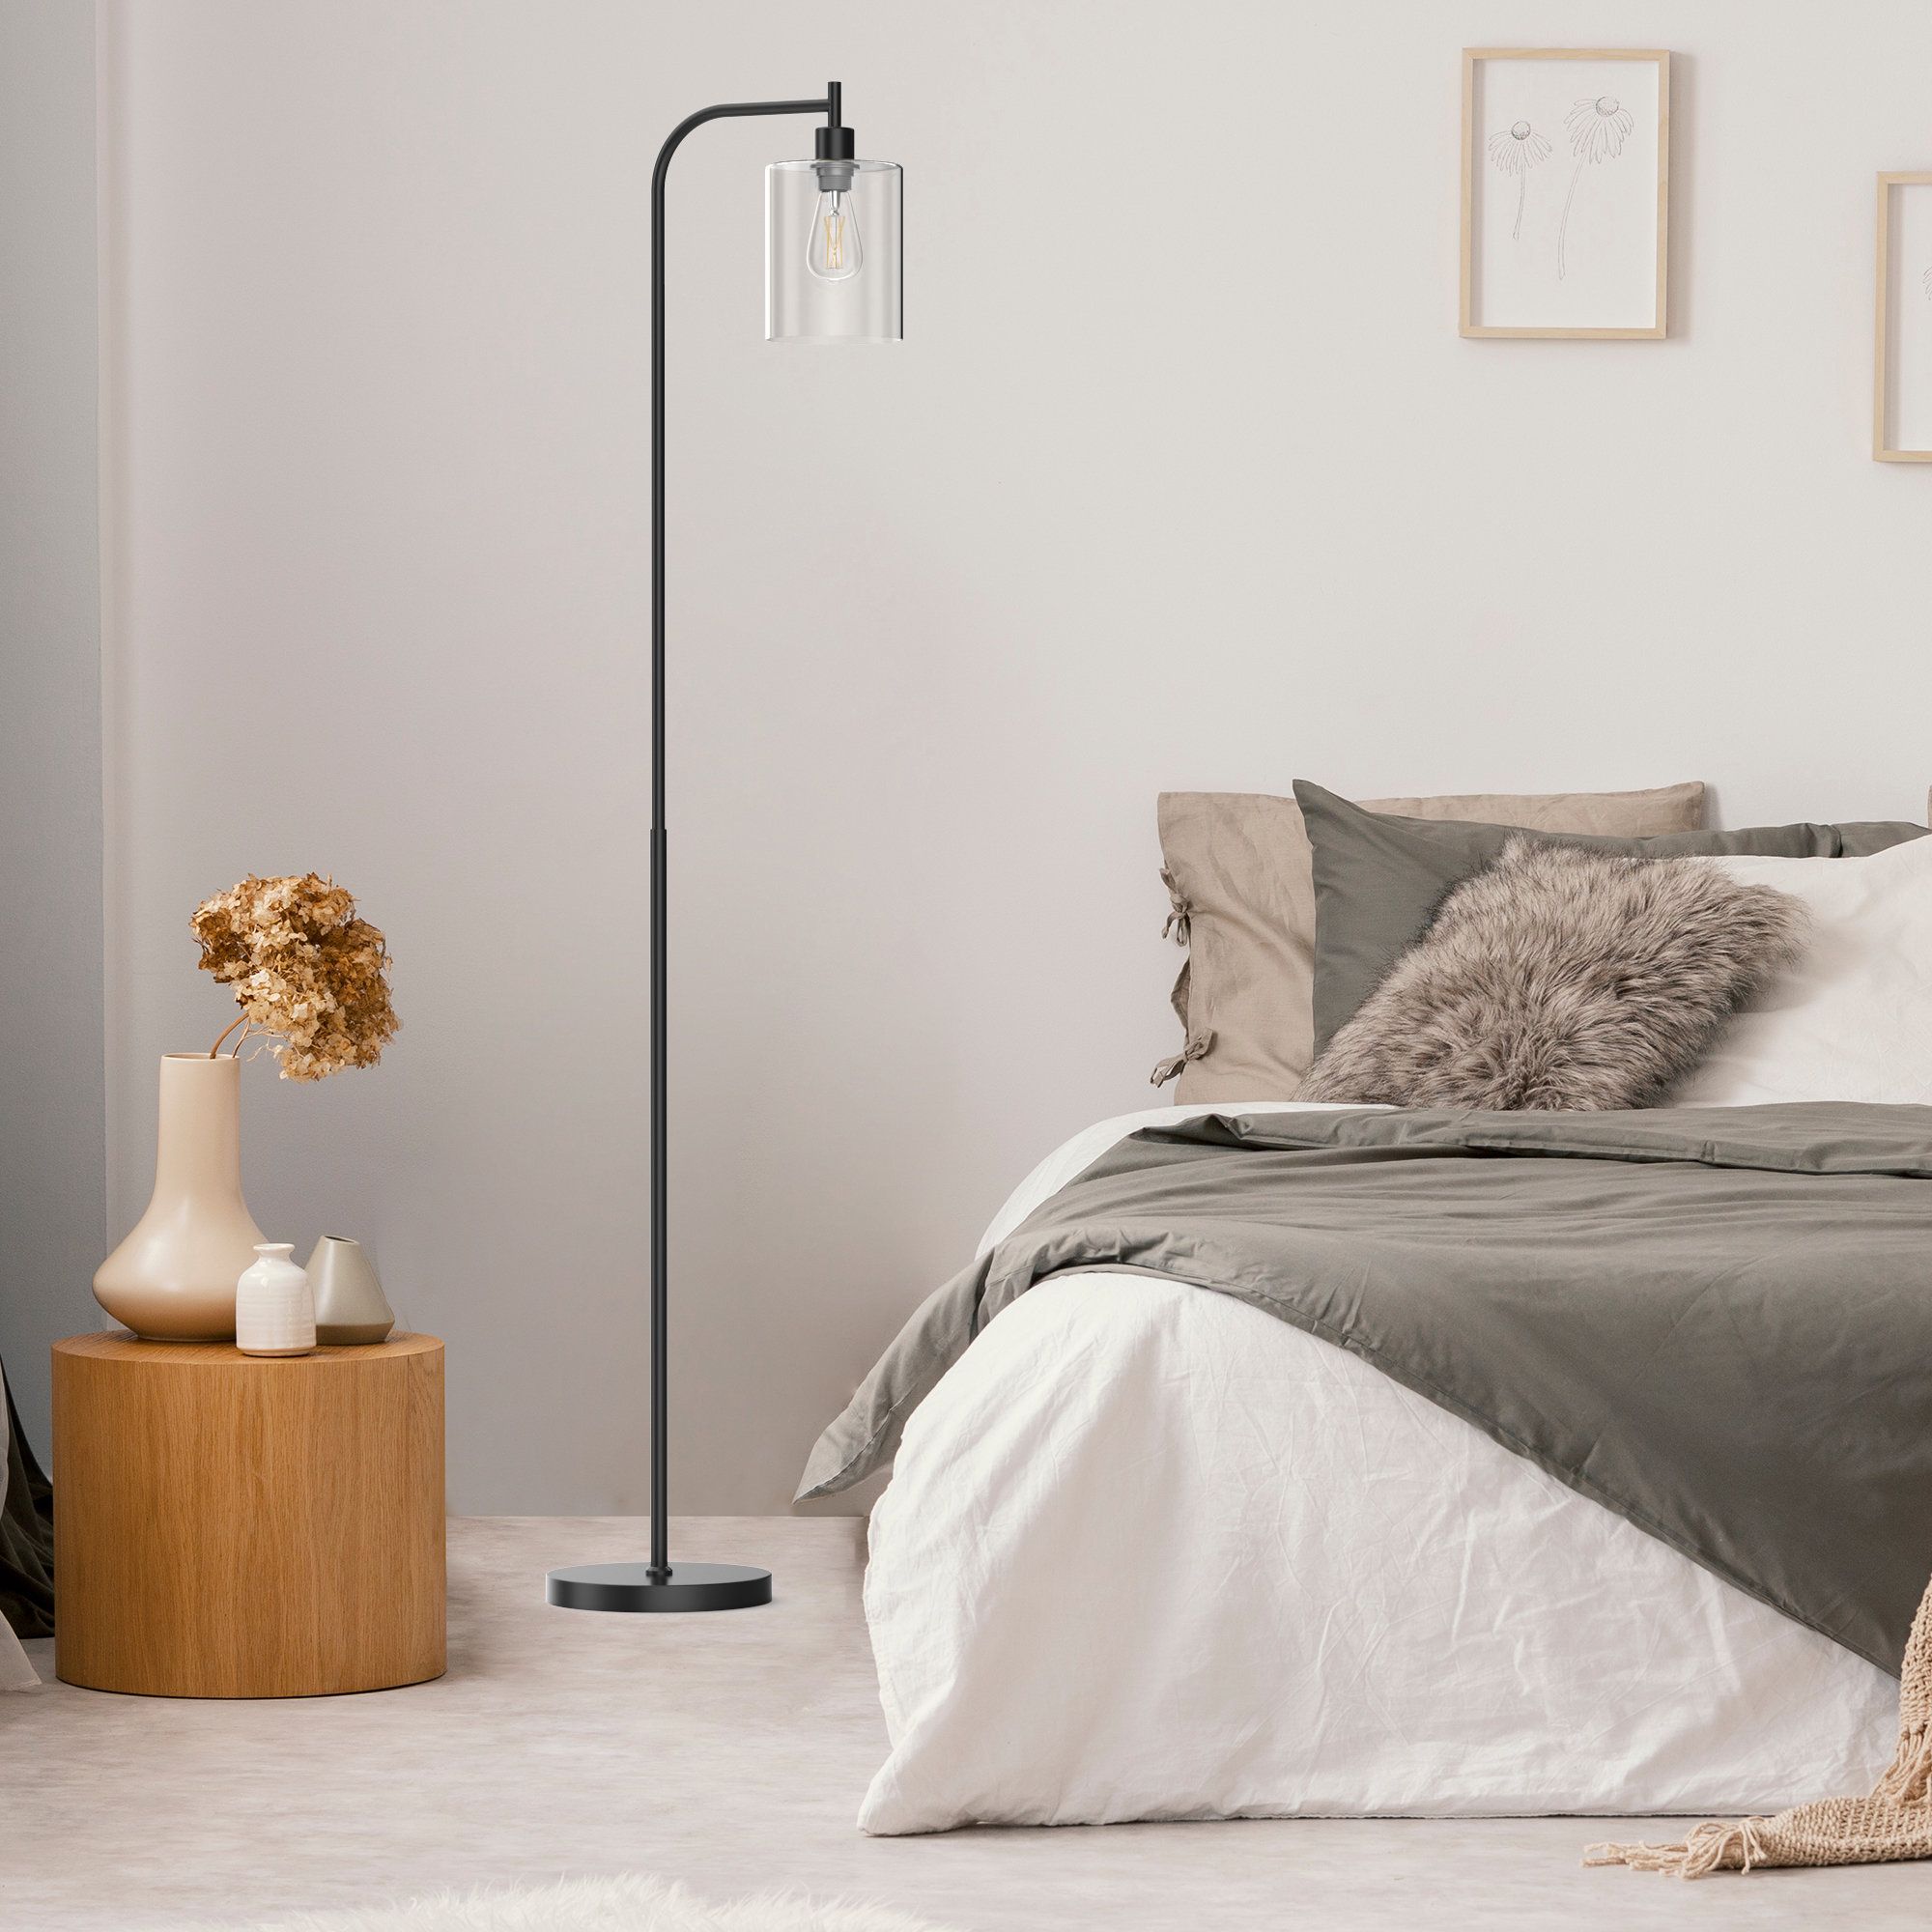 Pazzo Modern Standing Tall Industrial Arched/arc Floor Lamp With Glass  Shade And 2 Bulbs Included & Reviews | Wayfair Throughout Modern Floor Lamps (View 2 of 15)